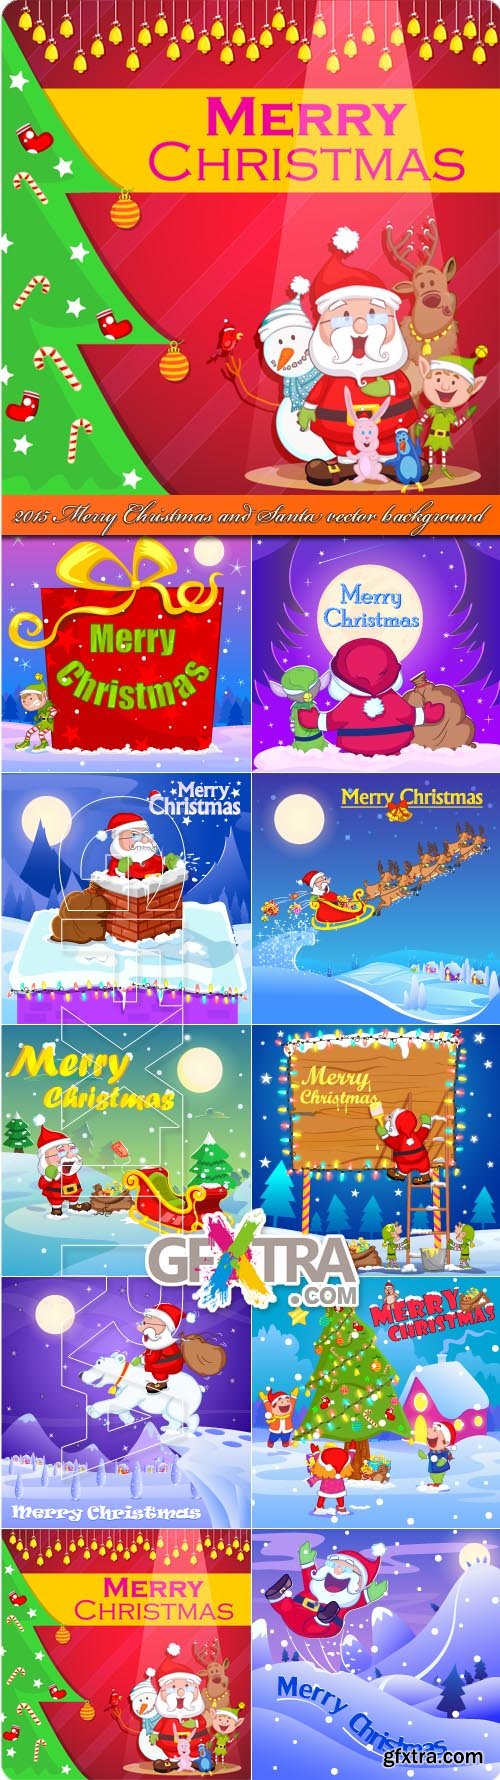 Merry Christmas and Santa vector background